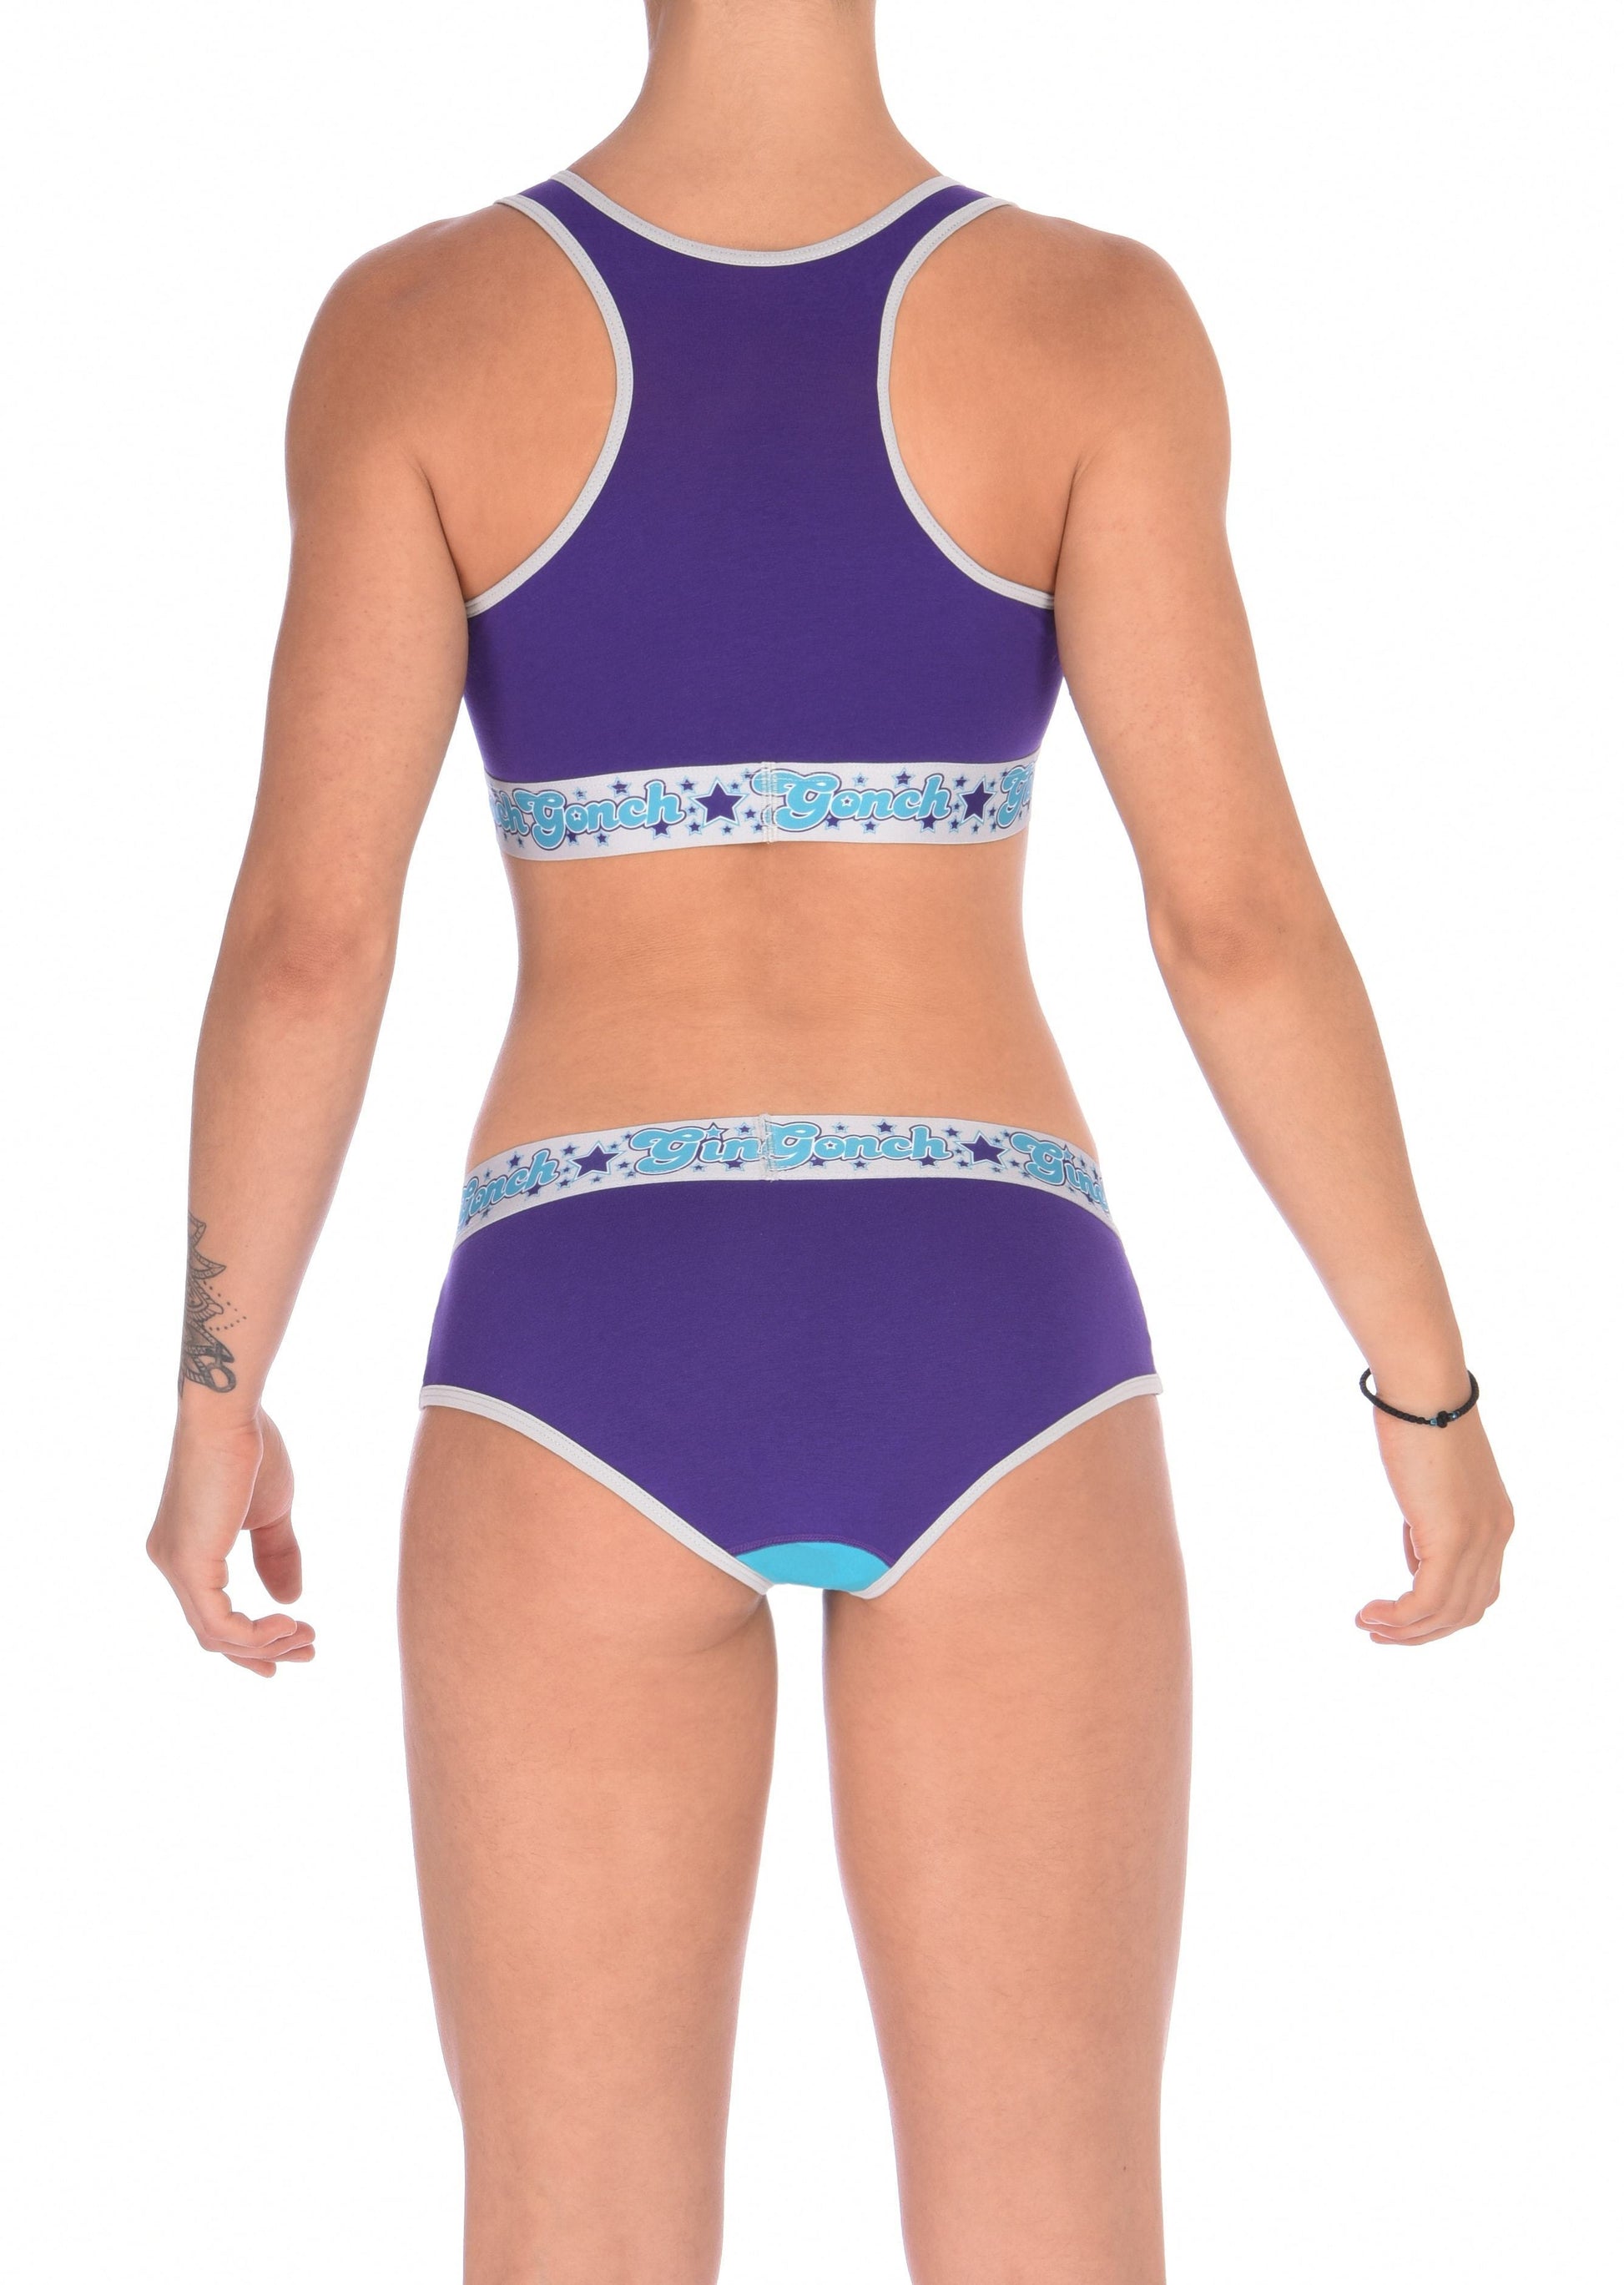 GG Ginch Gonch Purple Haze Low Rise boy cut Brief y front - Women's Underwear purple and aqua panels with grey trim and silver printed waistband back shown with matching sports bra 